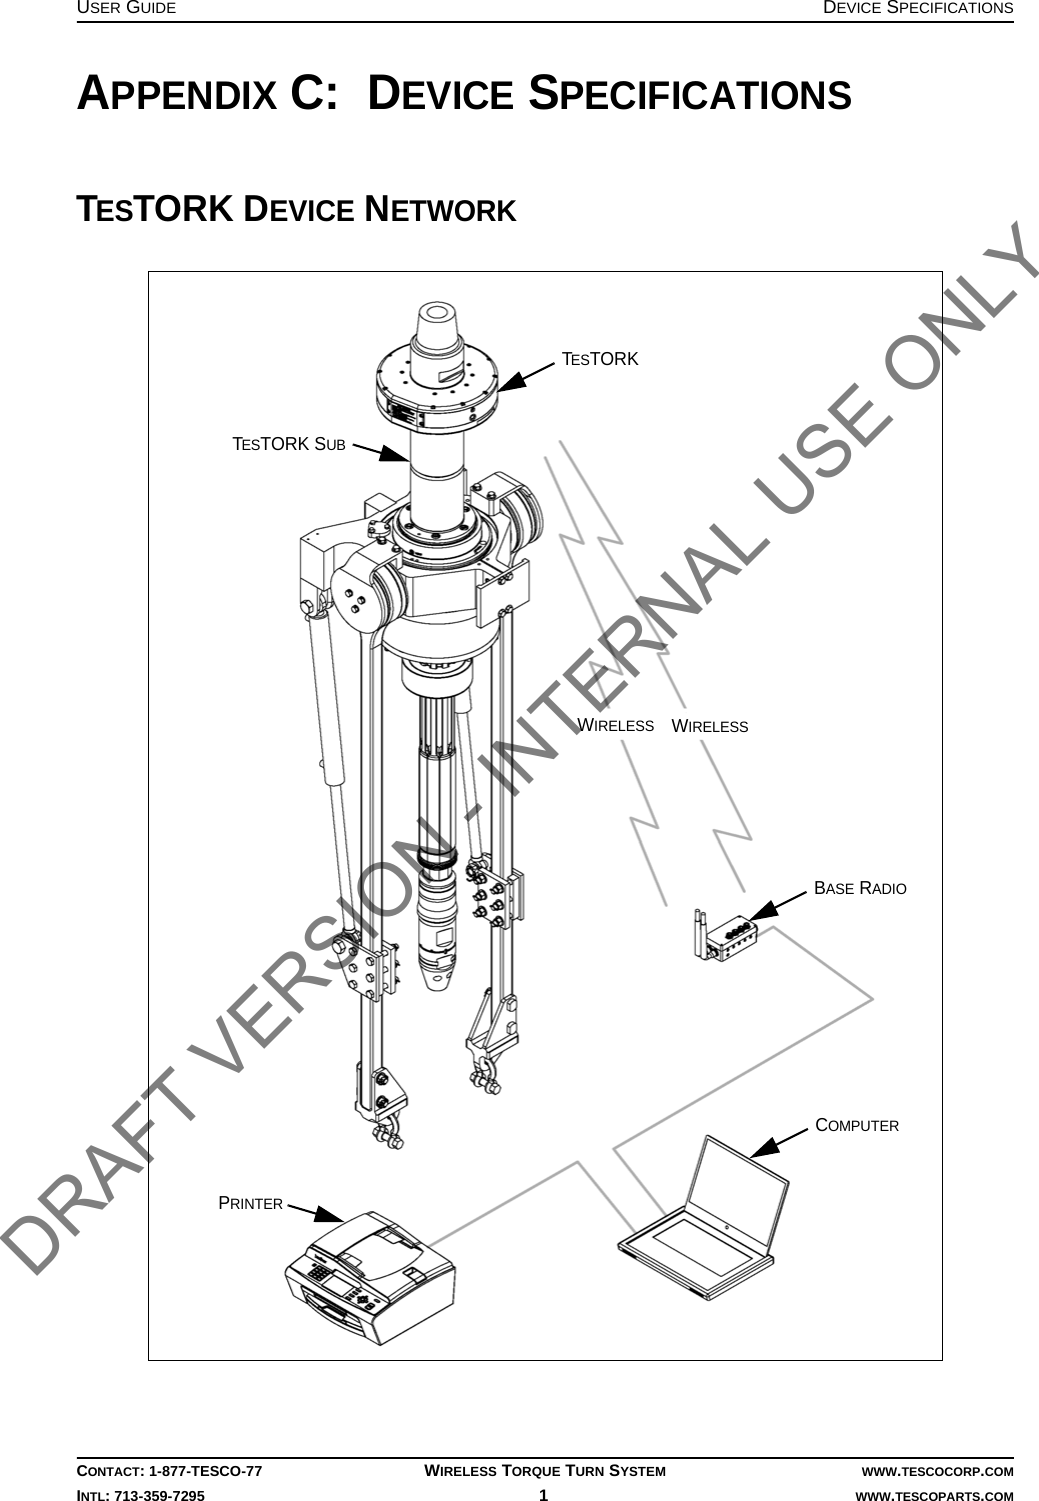 USER GUIDE DEVICE SPECIFICATIONSCONTACT: 1-877-TESCO-77 WIRELESS TORQUE TURN SYSTEM WWW.TESCOCORP.COMINTL: 713-359-7295 1   WWW.TESCOPARTS.COMAPPENDIX C:  DEVICE SPECIFICATIONSTESTORK DEVICE NETWORKTESTORKTESTORK SUBWIRELESSWIRELESSBASE RADIOCOMPUTERPRINTERDRAFT VERSION - INTERNAL USE ONLY